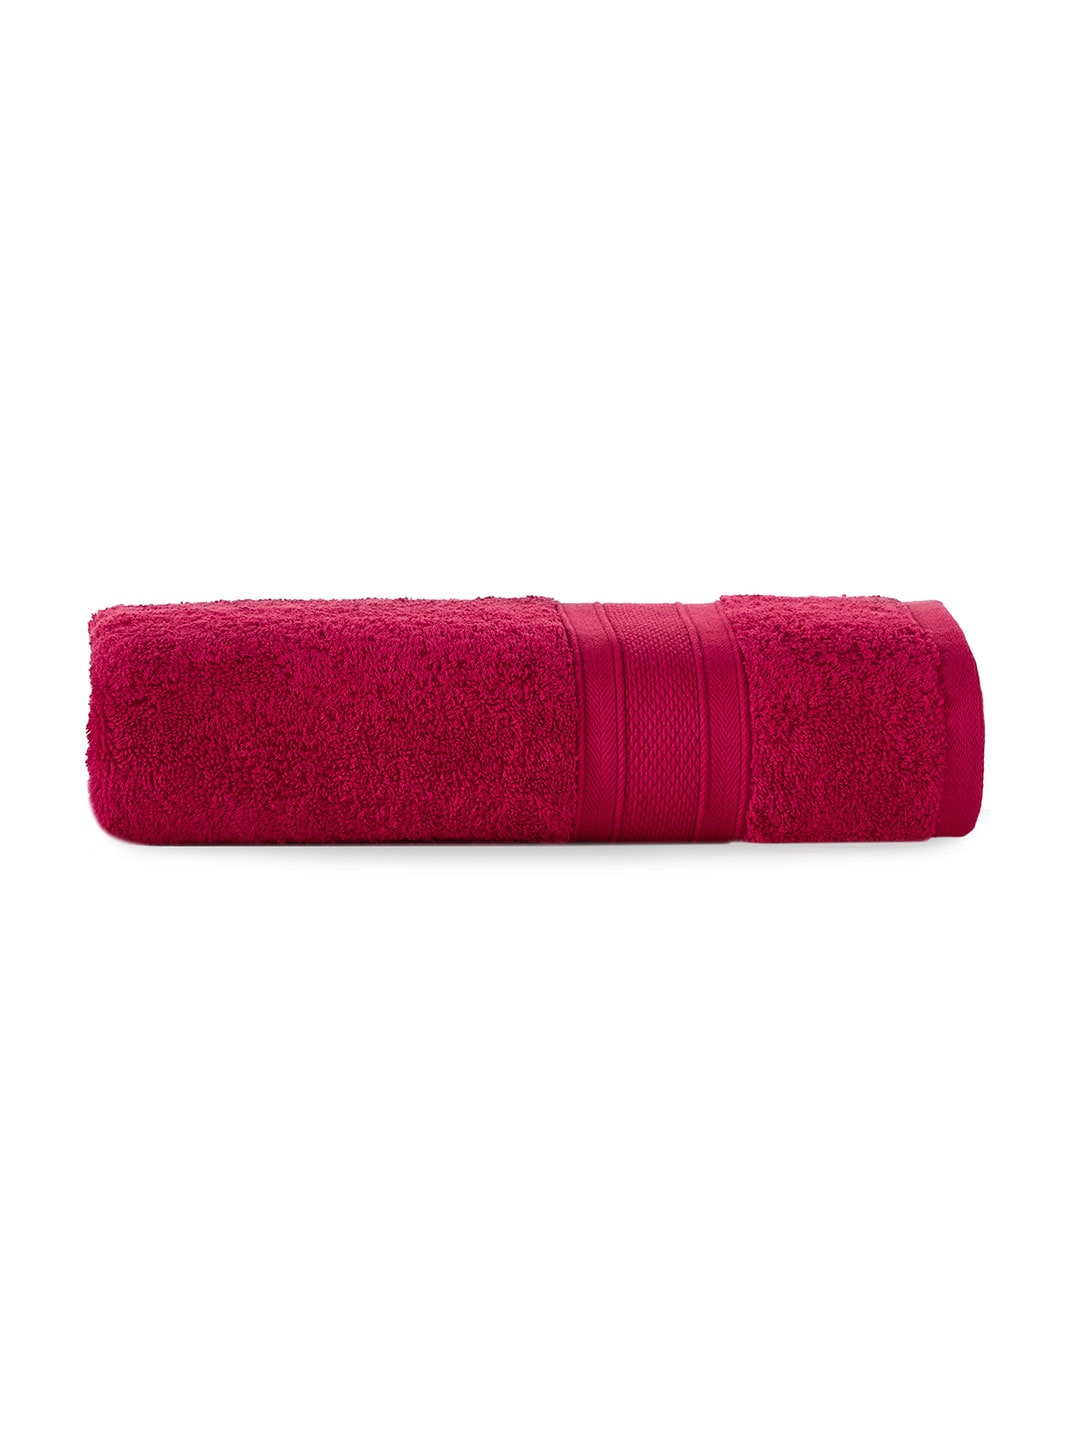 Trident Red Solid Pure Cotton 500 GSM Bath Towel Price in India